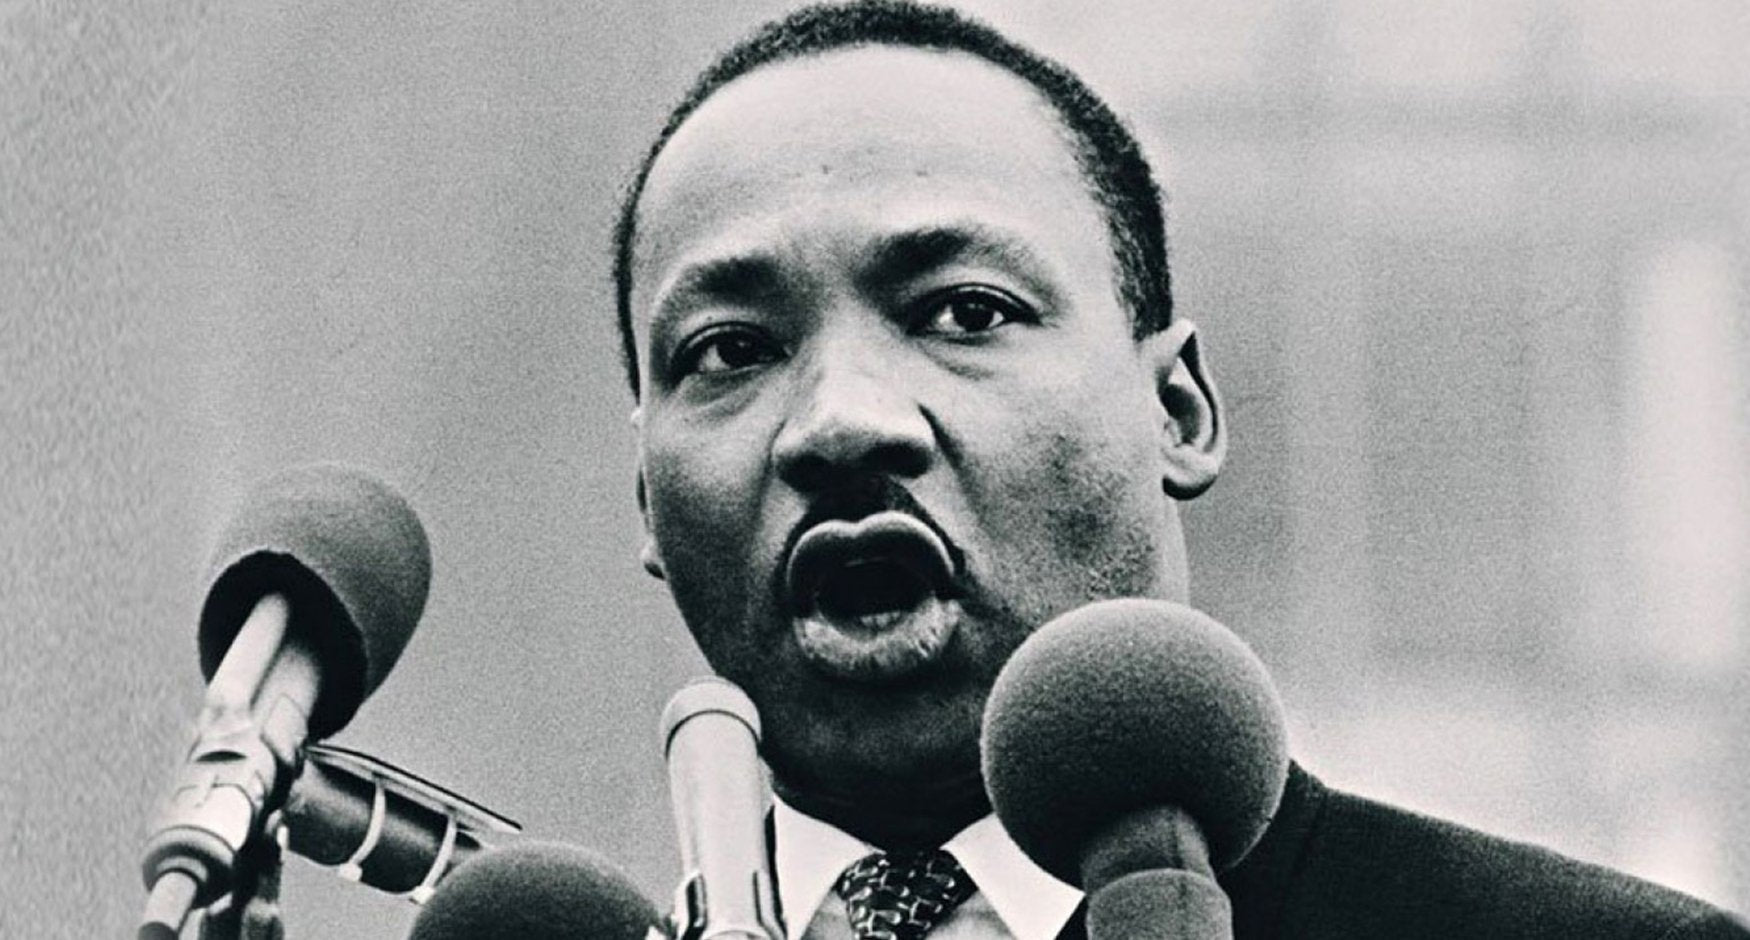 August 28, 1963: "I have a dream"